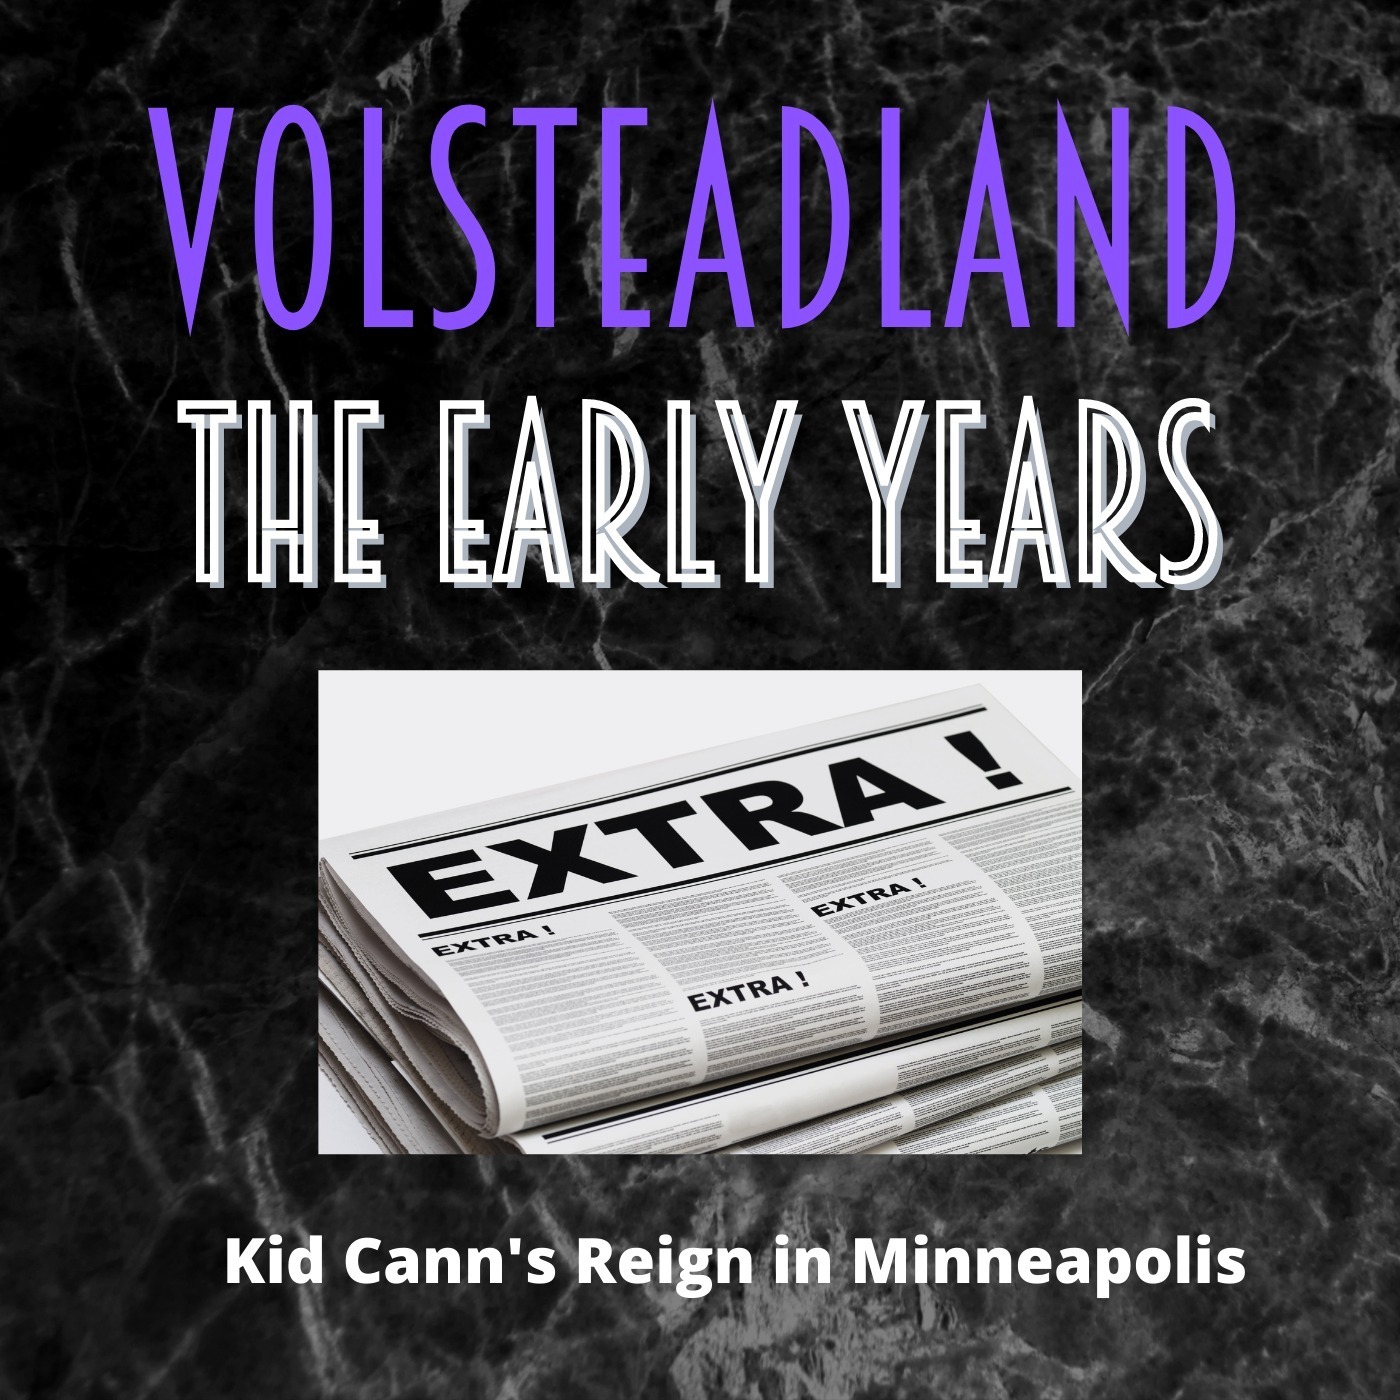 Volsteadland: The Early Years Image